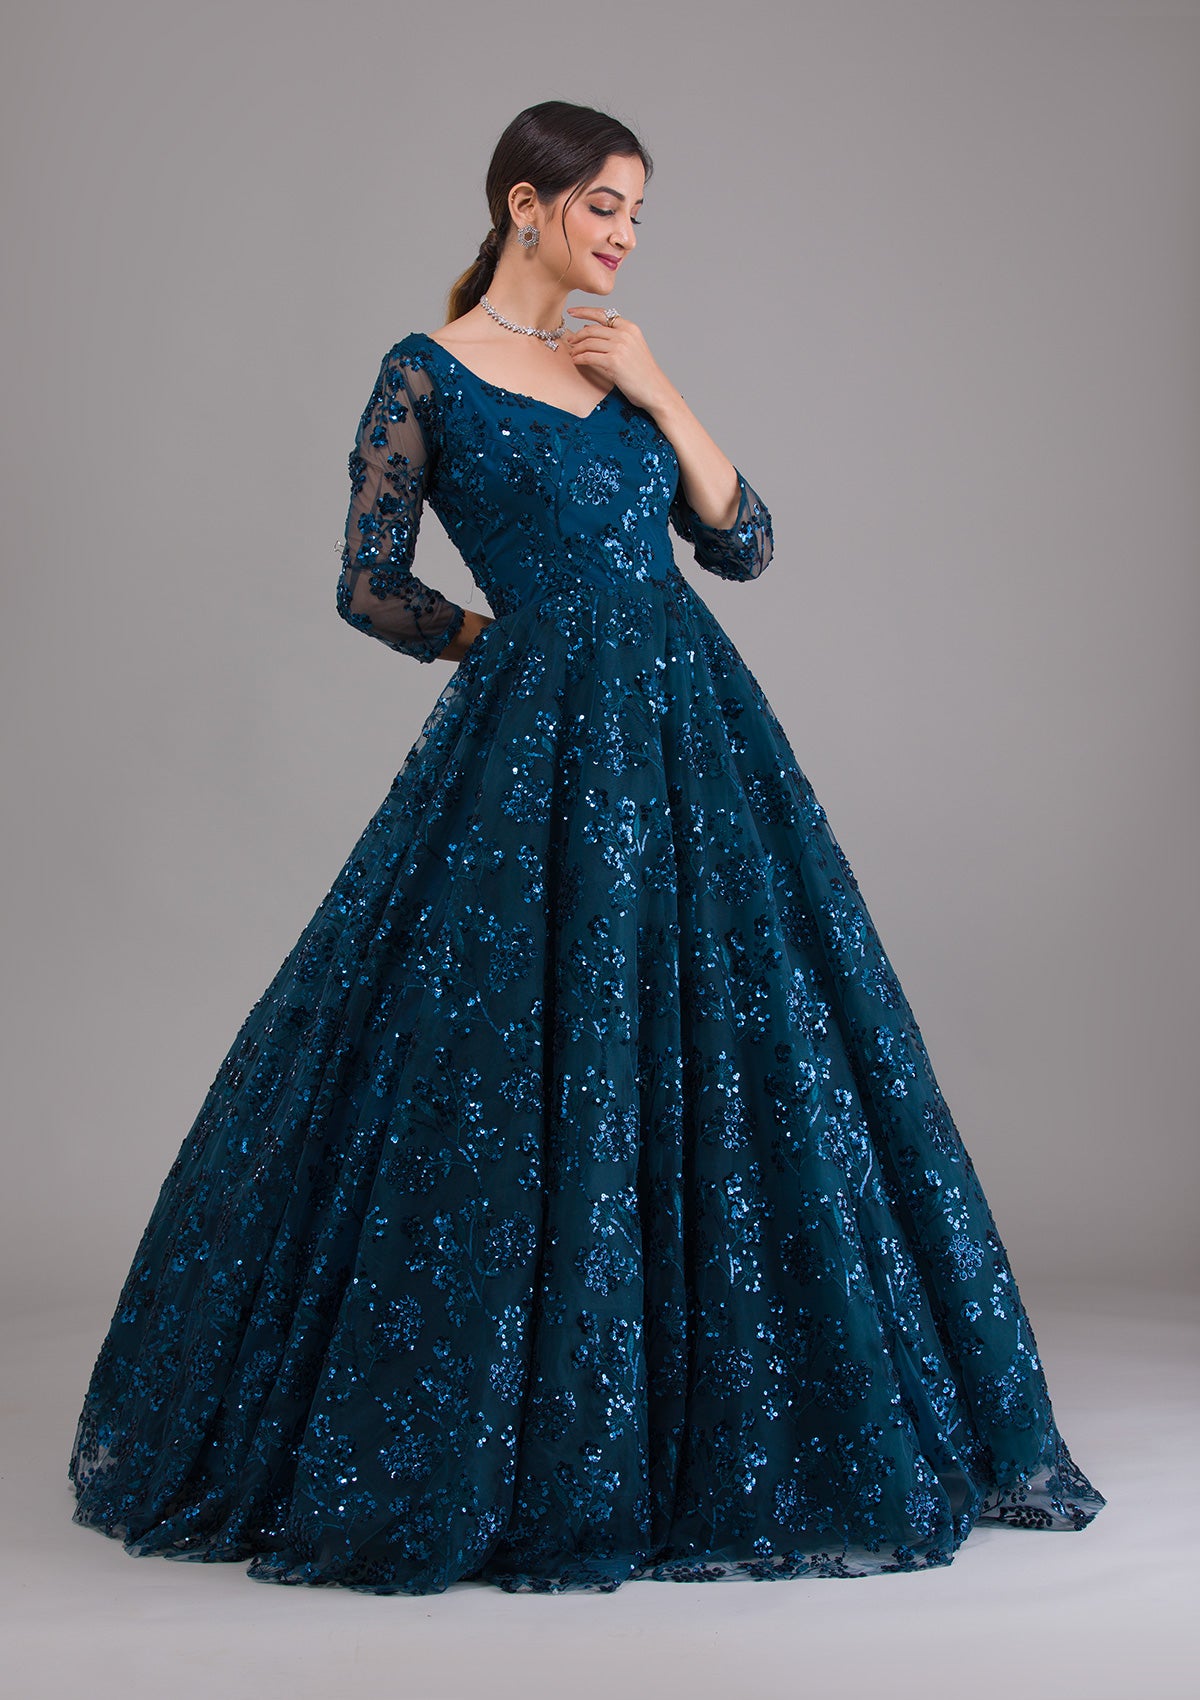 Vintage Black Lace Applique Second Hand Prom Dresses With Long Sleeves,  Ruffle Detail, And High Low Hemline Perfect For Special Occasions And Formal  Events In 2019 From Greatvip, $103.58 | DHgate.Com